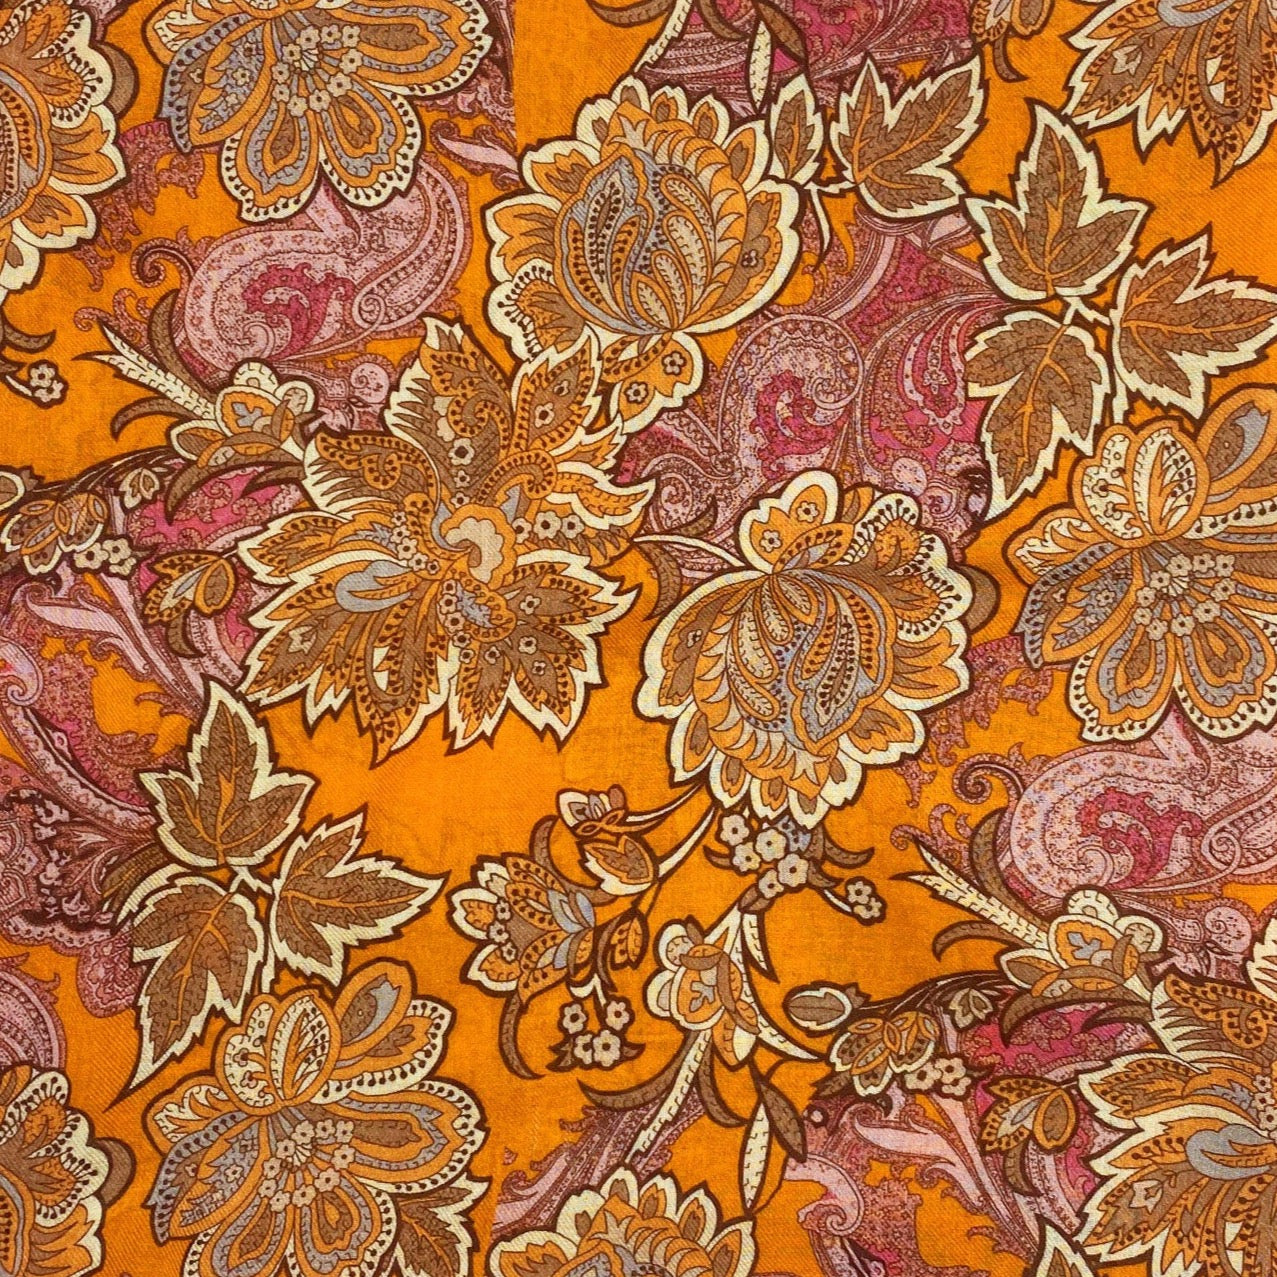 A flat, folded view of 'The Niagra' bandana. Clearly showing the intricate floral and leaf patterns in various shades of orange and pink on a deep orange background.